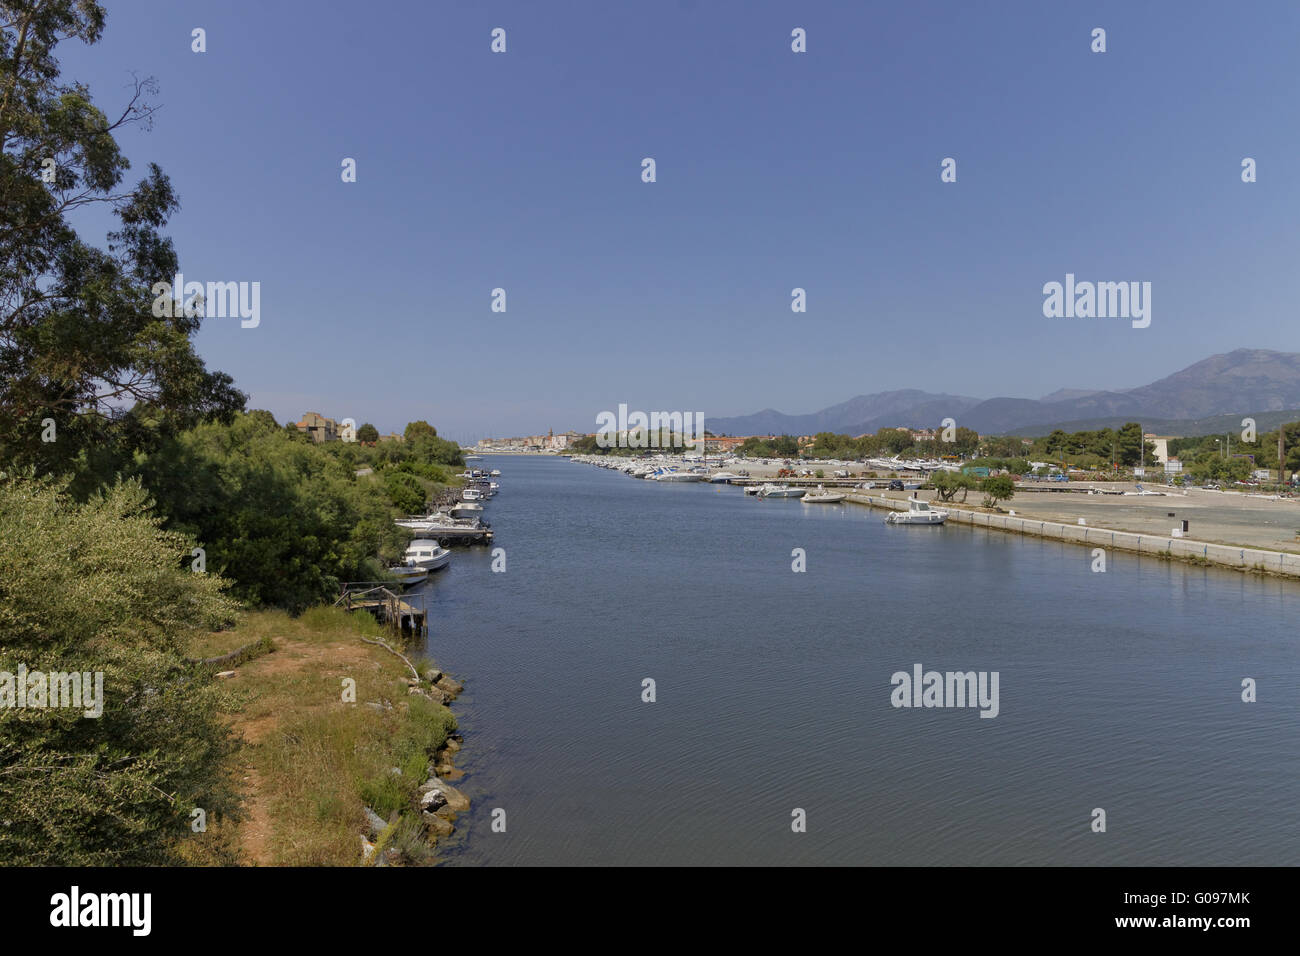 River and view of Saint Florent, Corsica, France Stock Photo